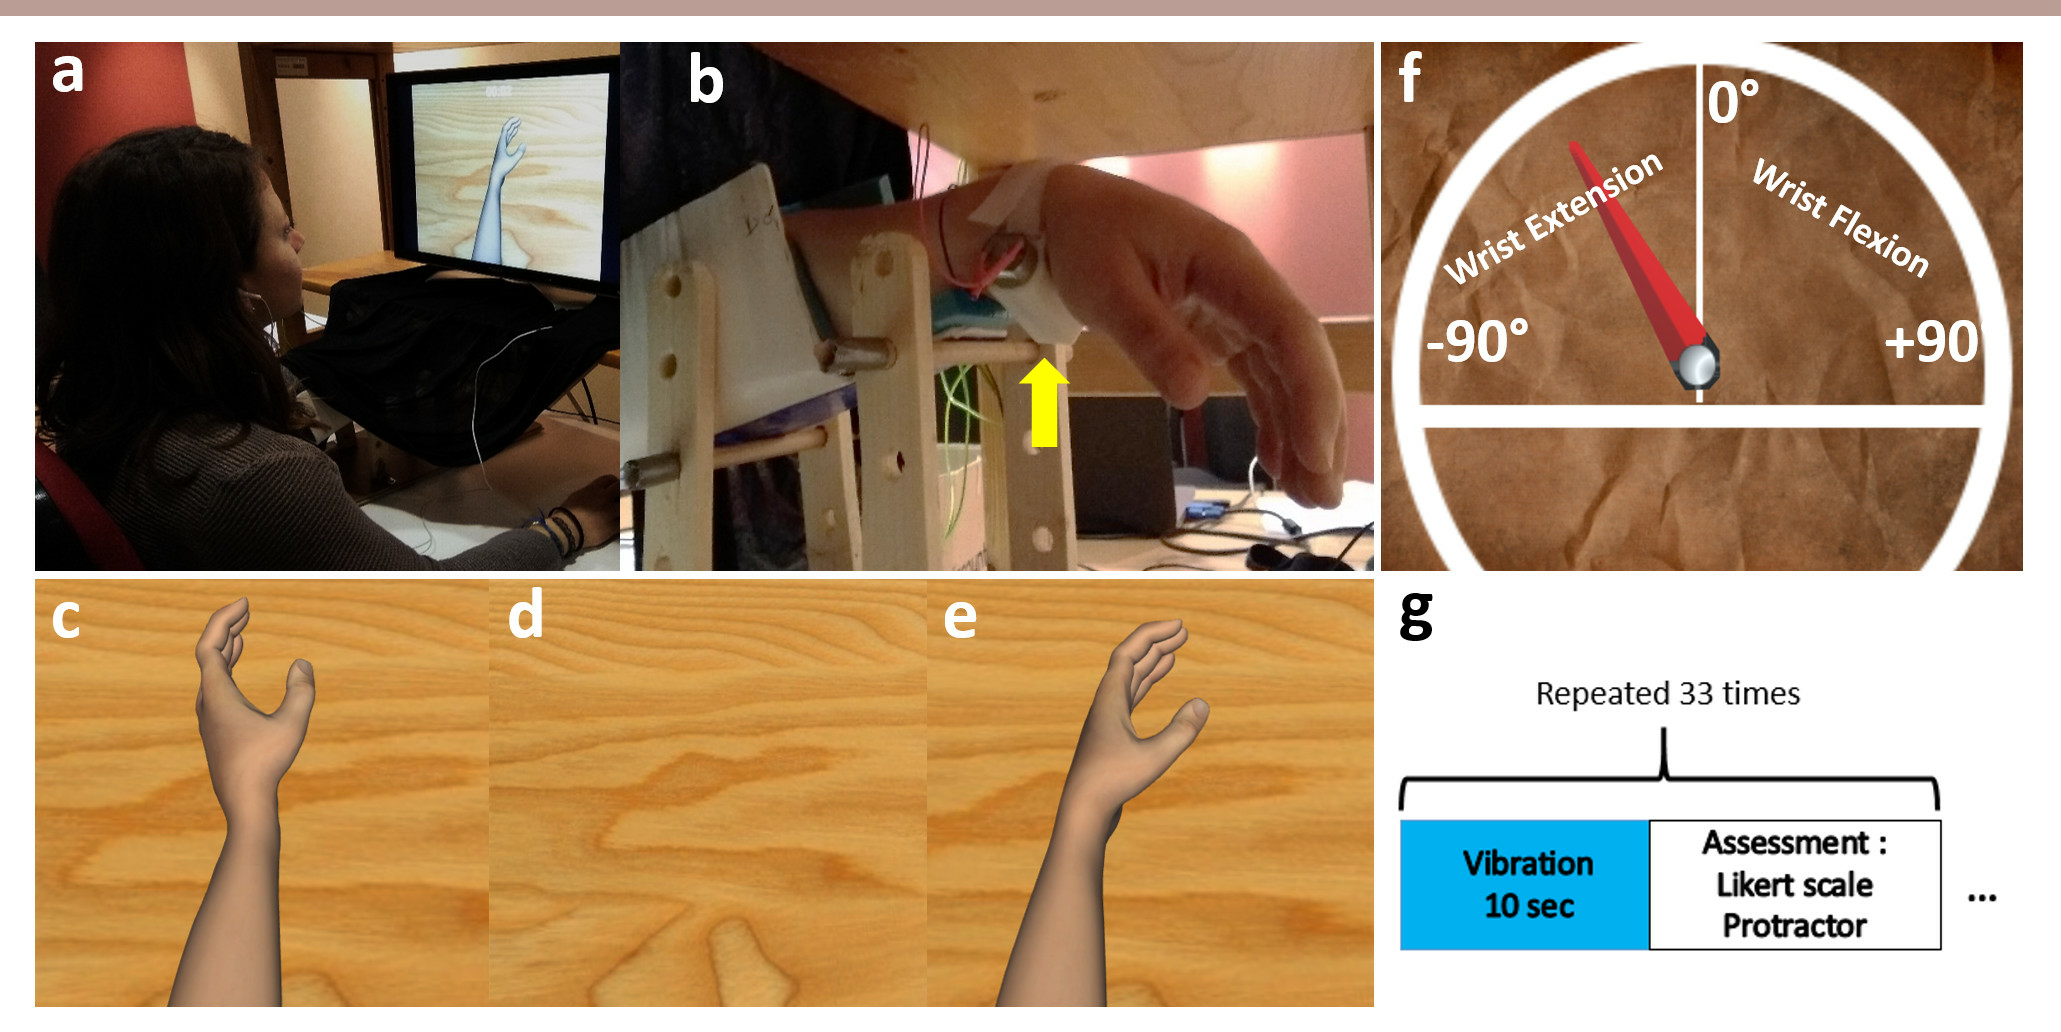 Experimental setup for studying tendon vibration illusions in VR.